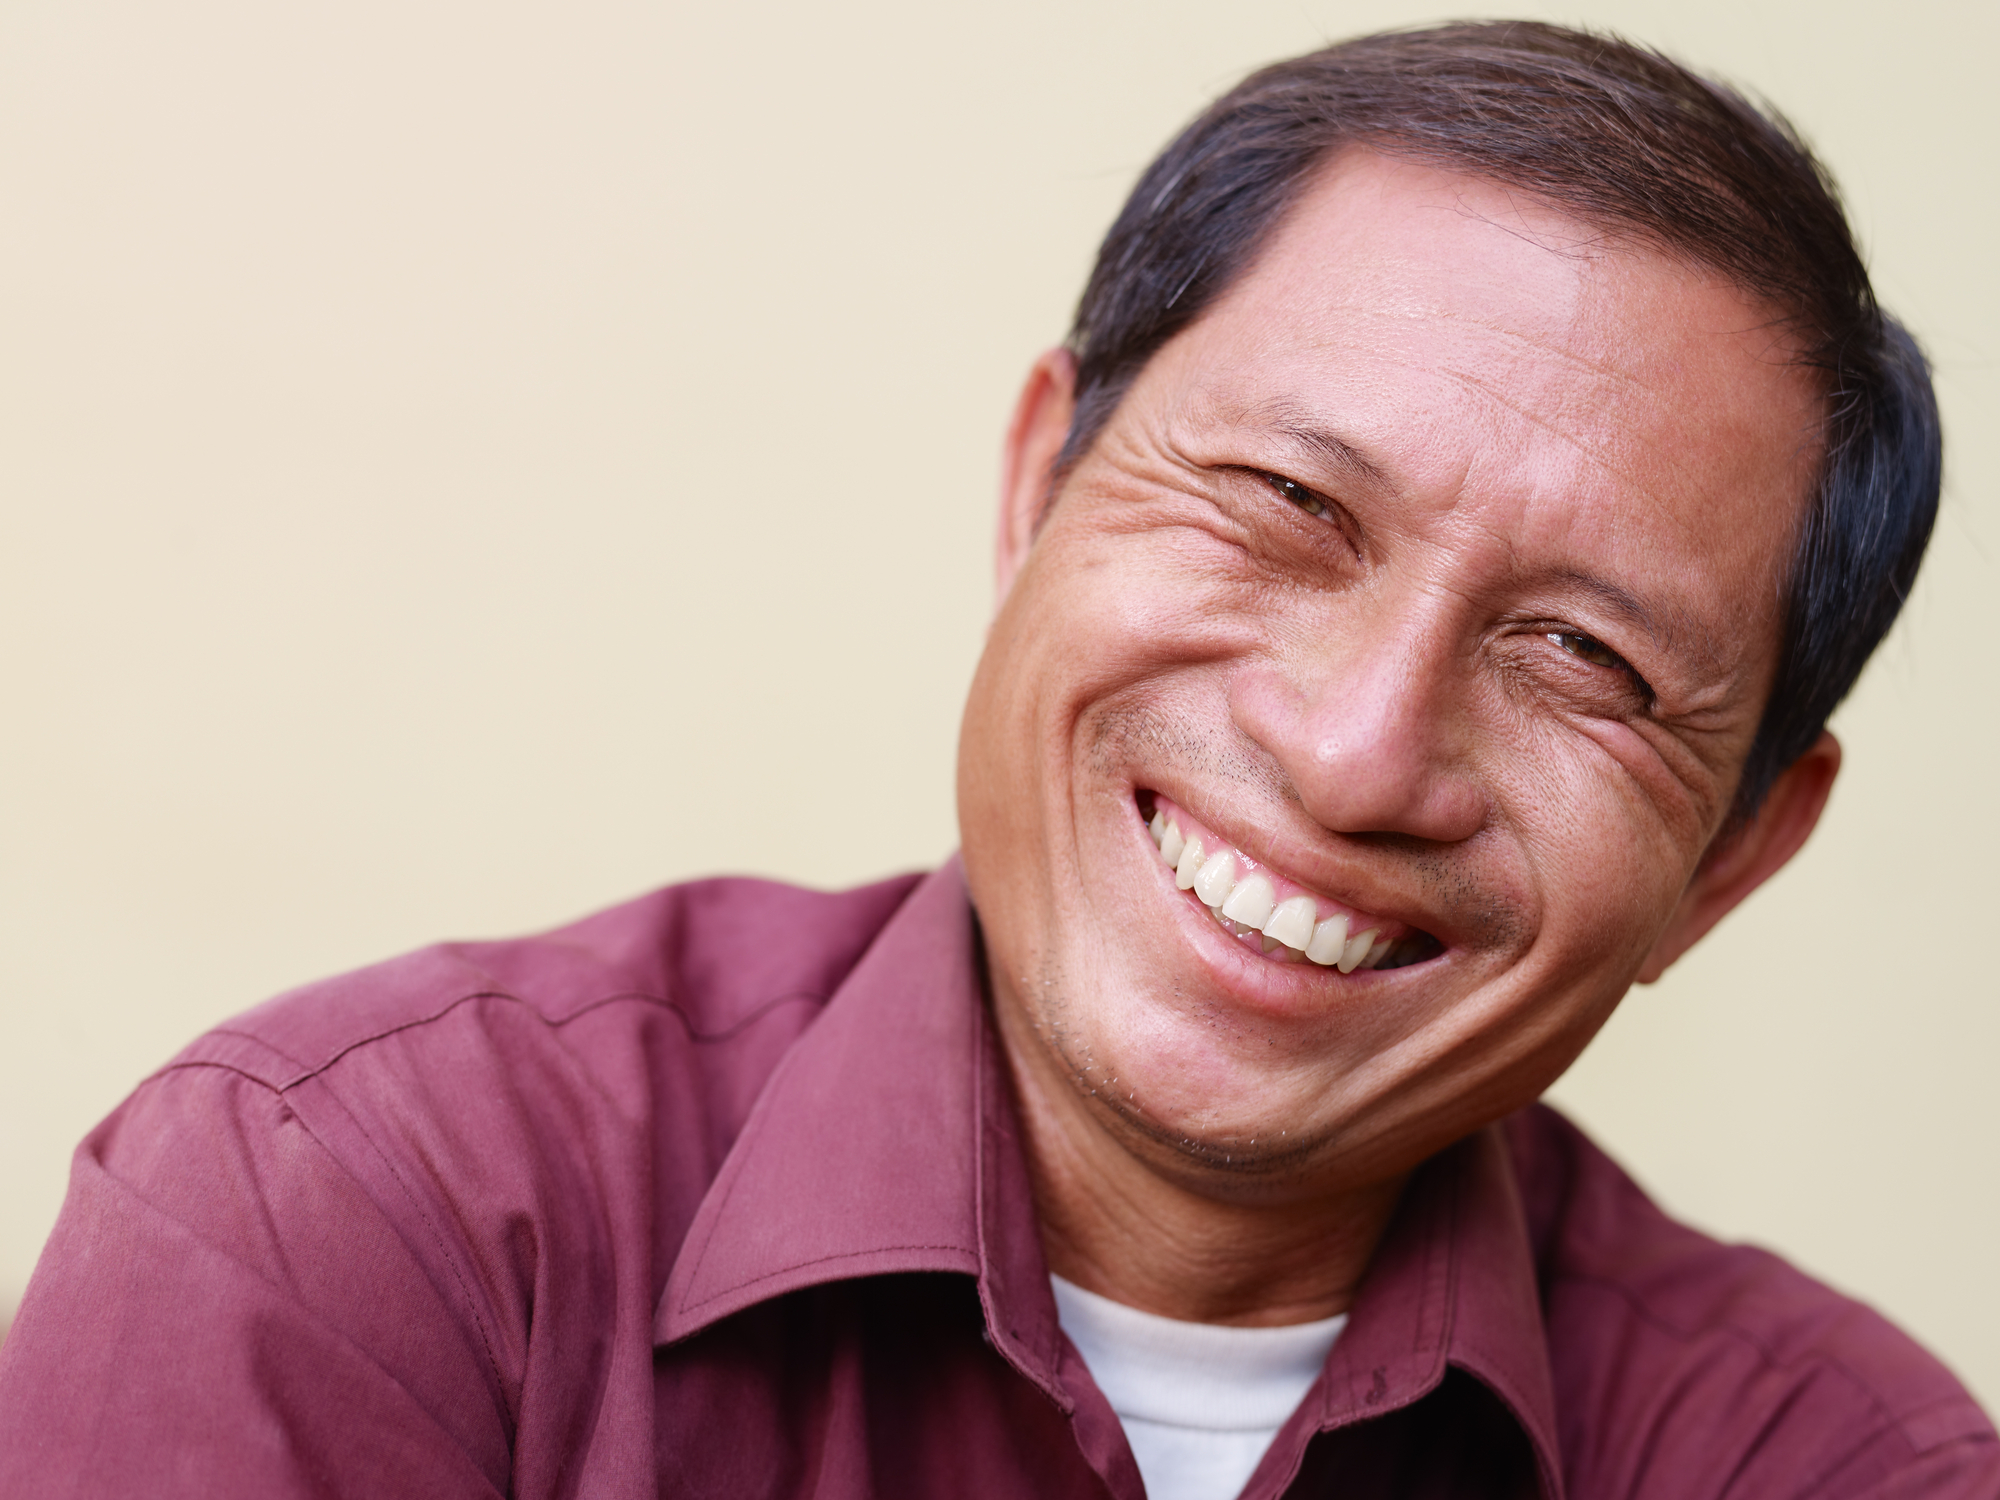 man that is a good candidate for dental implants in calgary